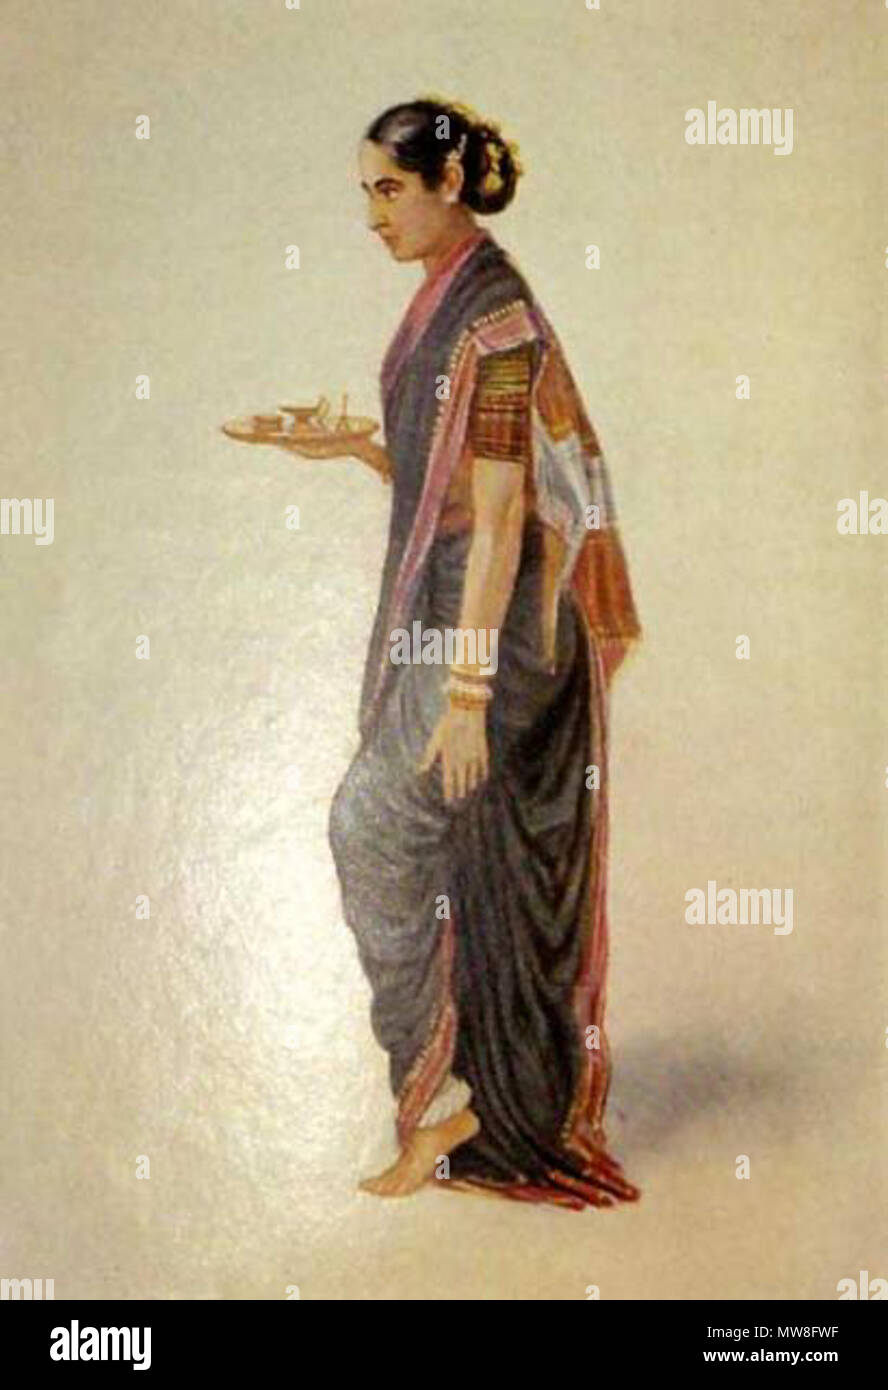 . English: 'A Rajput lady from Kutch,' a watercolor by Rao Bahadur M. V. Dhurandhar, 1928; more watercolors from the set:      *'A working woman at Ajmere'*      *'ABengali lady'*      *'A Bhatia lady'*      *'A Bhil girl'*      *'A Bombay lady'*      *'A Borah lady, Surat'*      *'Born beside the sacred river'*      *'A Brahman lady'*      *'From Burmah'*      *'Cambay type'*      *'A dancer in Mirzapur'*      *'A dancer from Tanjore'*      *'A widow in the Deccan'*      *'A dyer girl, Ahmedabad'*      *'A fisherwoman, Sind'*      *'A fishwife of Bombay'*      *'A denizen of the Western Ghaut Stock Photo